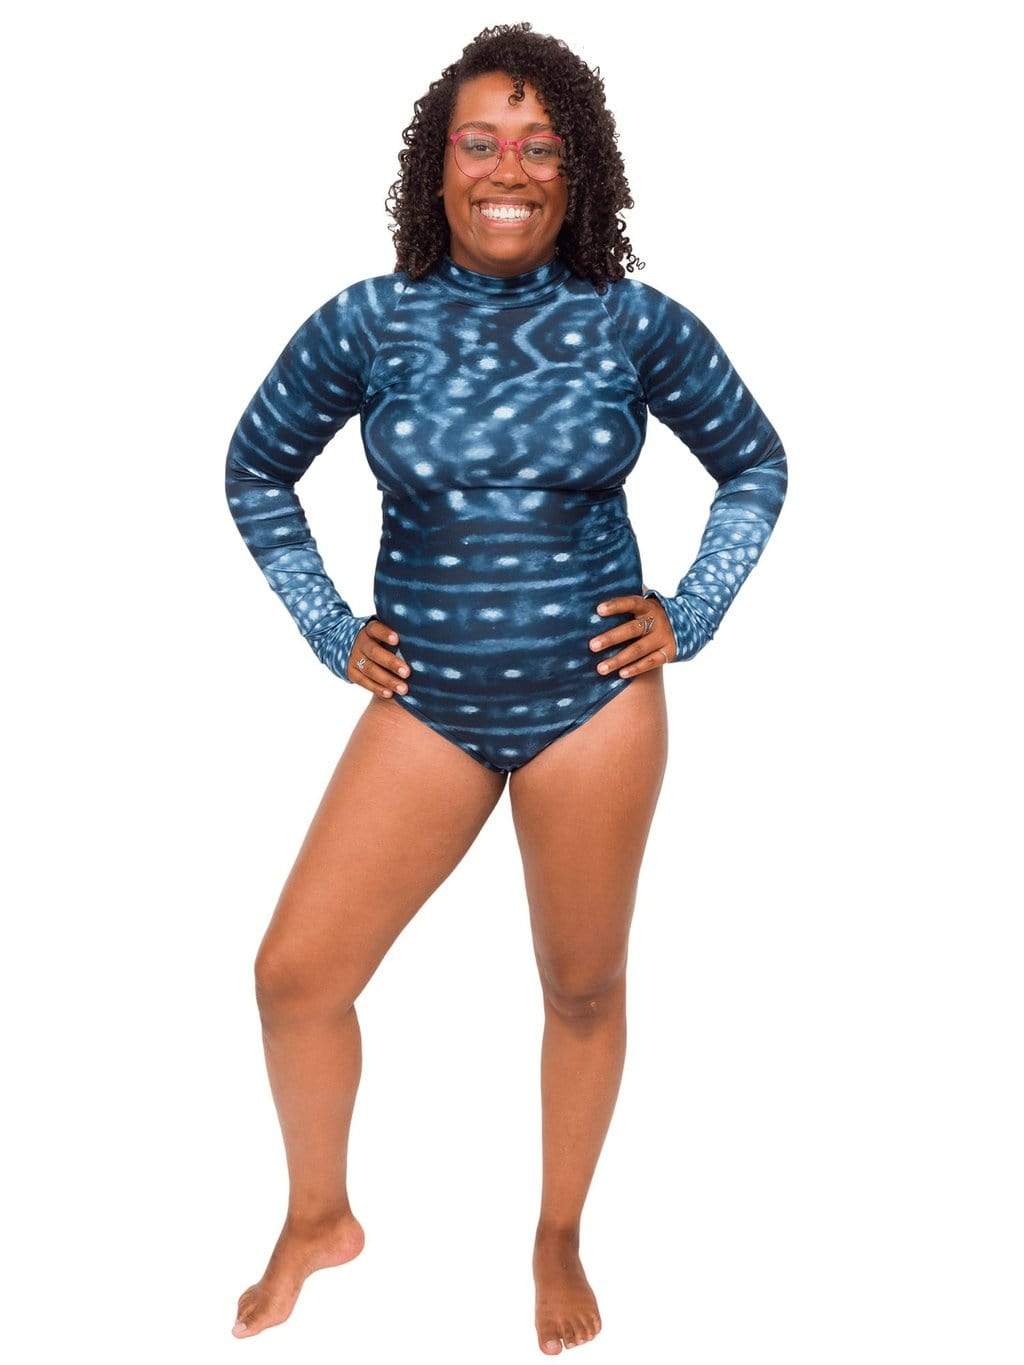 Model: Amani is the CFO of Minorities in Shark Sciences and a shark scientist. She is 5&#39;3&quot;, 160 lbs, 36C and is wearing a M.